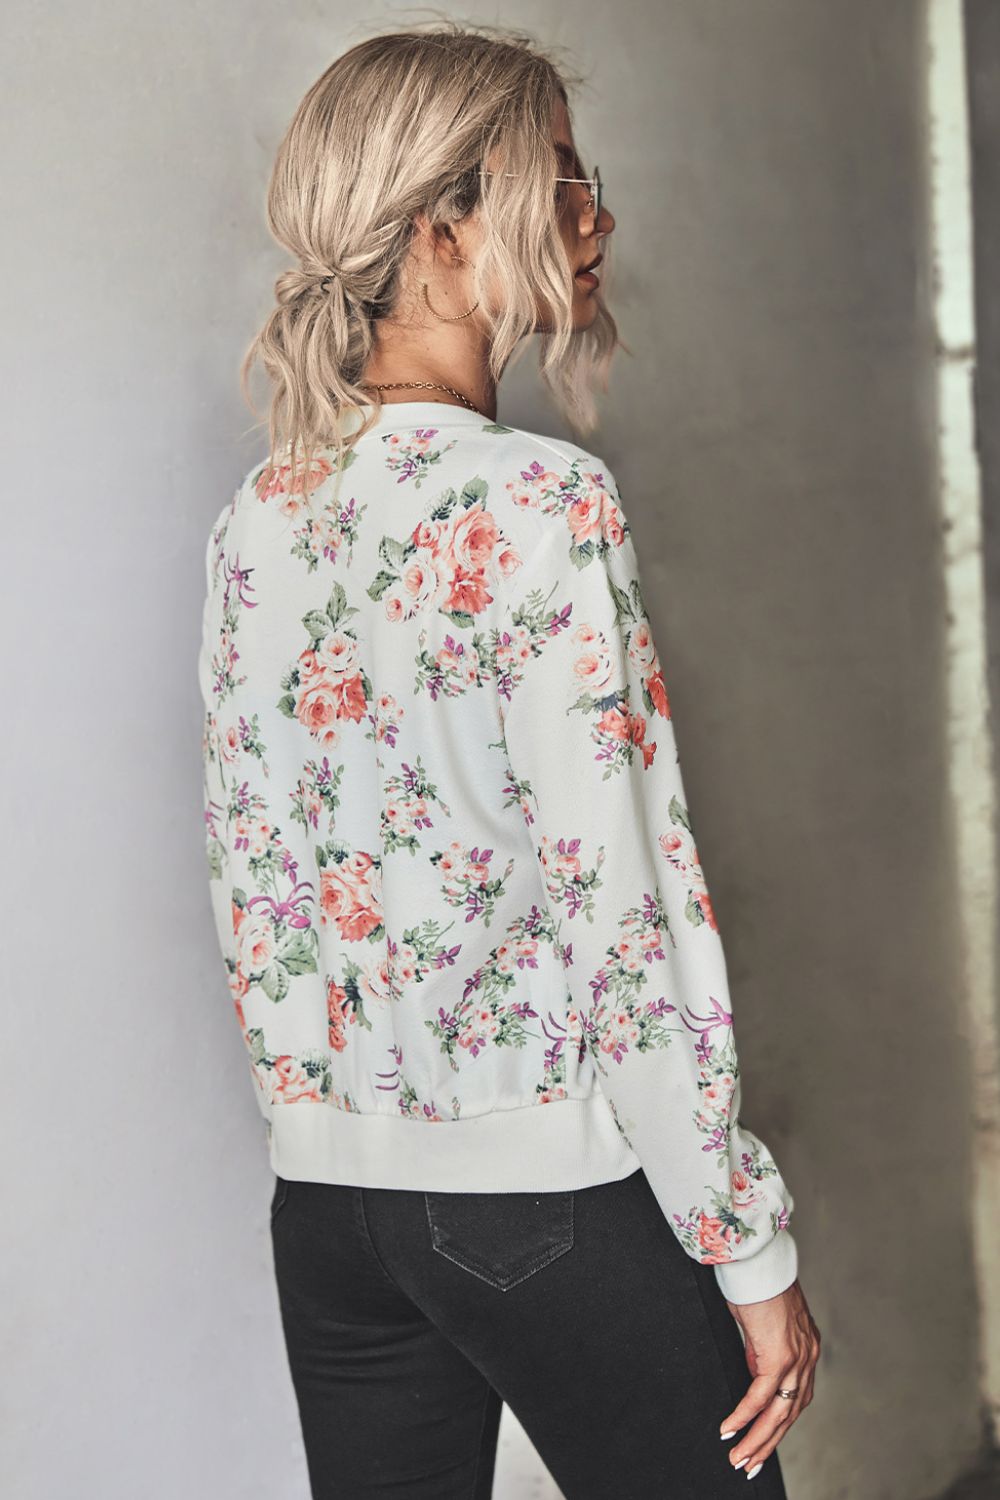 Woman wearing a white floral zip up lightweight floral bomber jacket with jeans